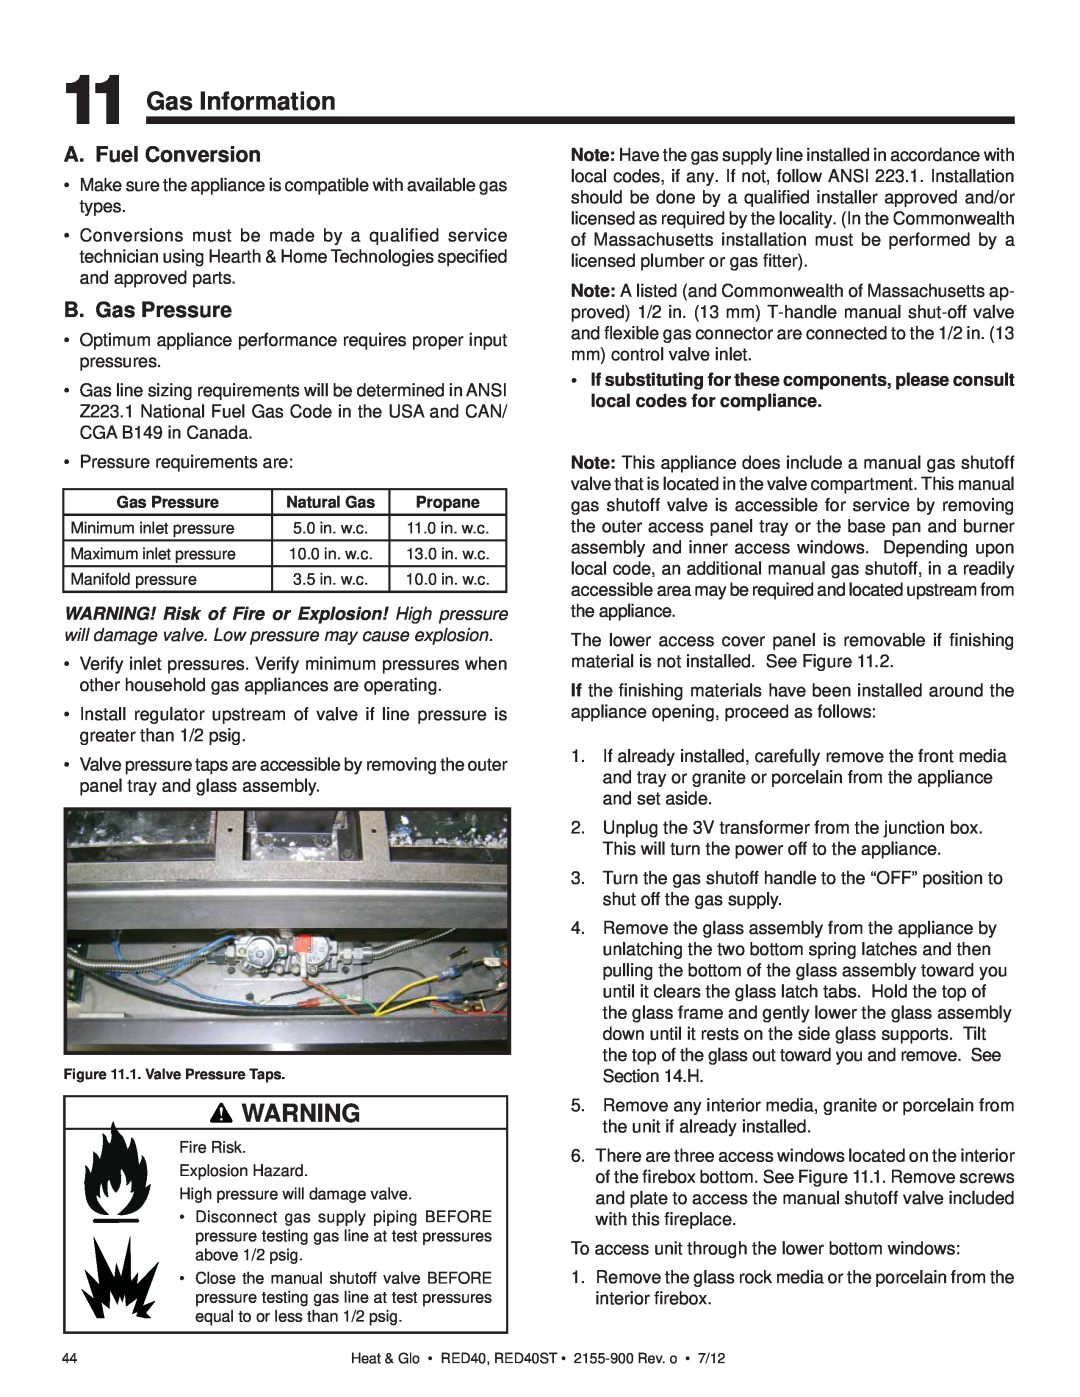 Heat & Glo LifeStyle RED40ST owner manual Gas Information, A. Fuel Conversion, B. Gas Pressure 